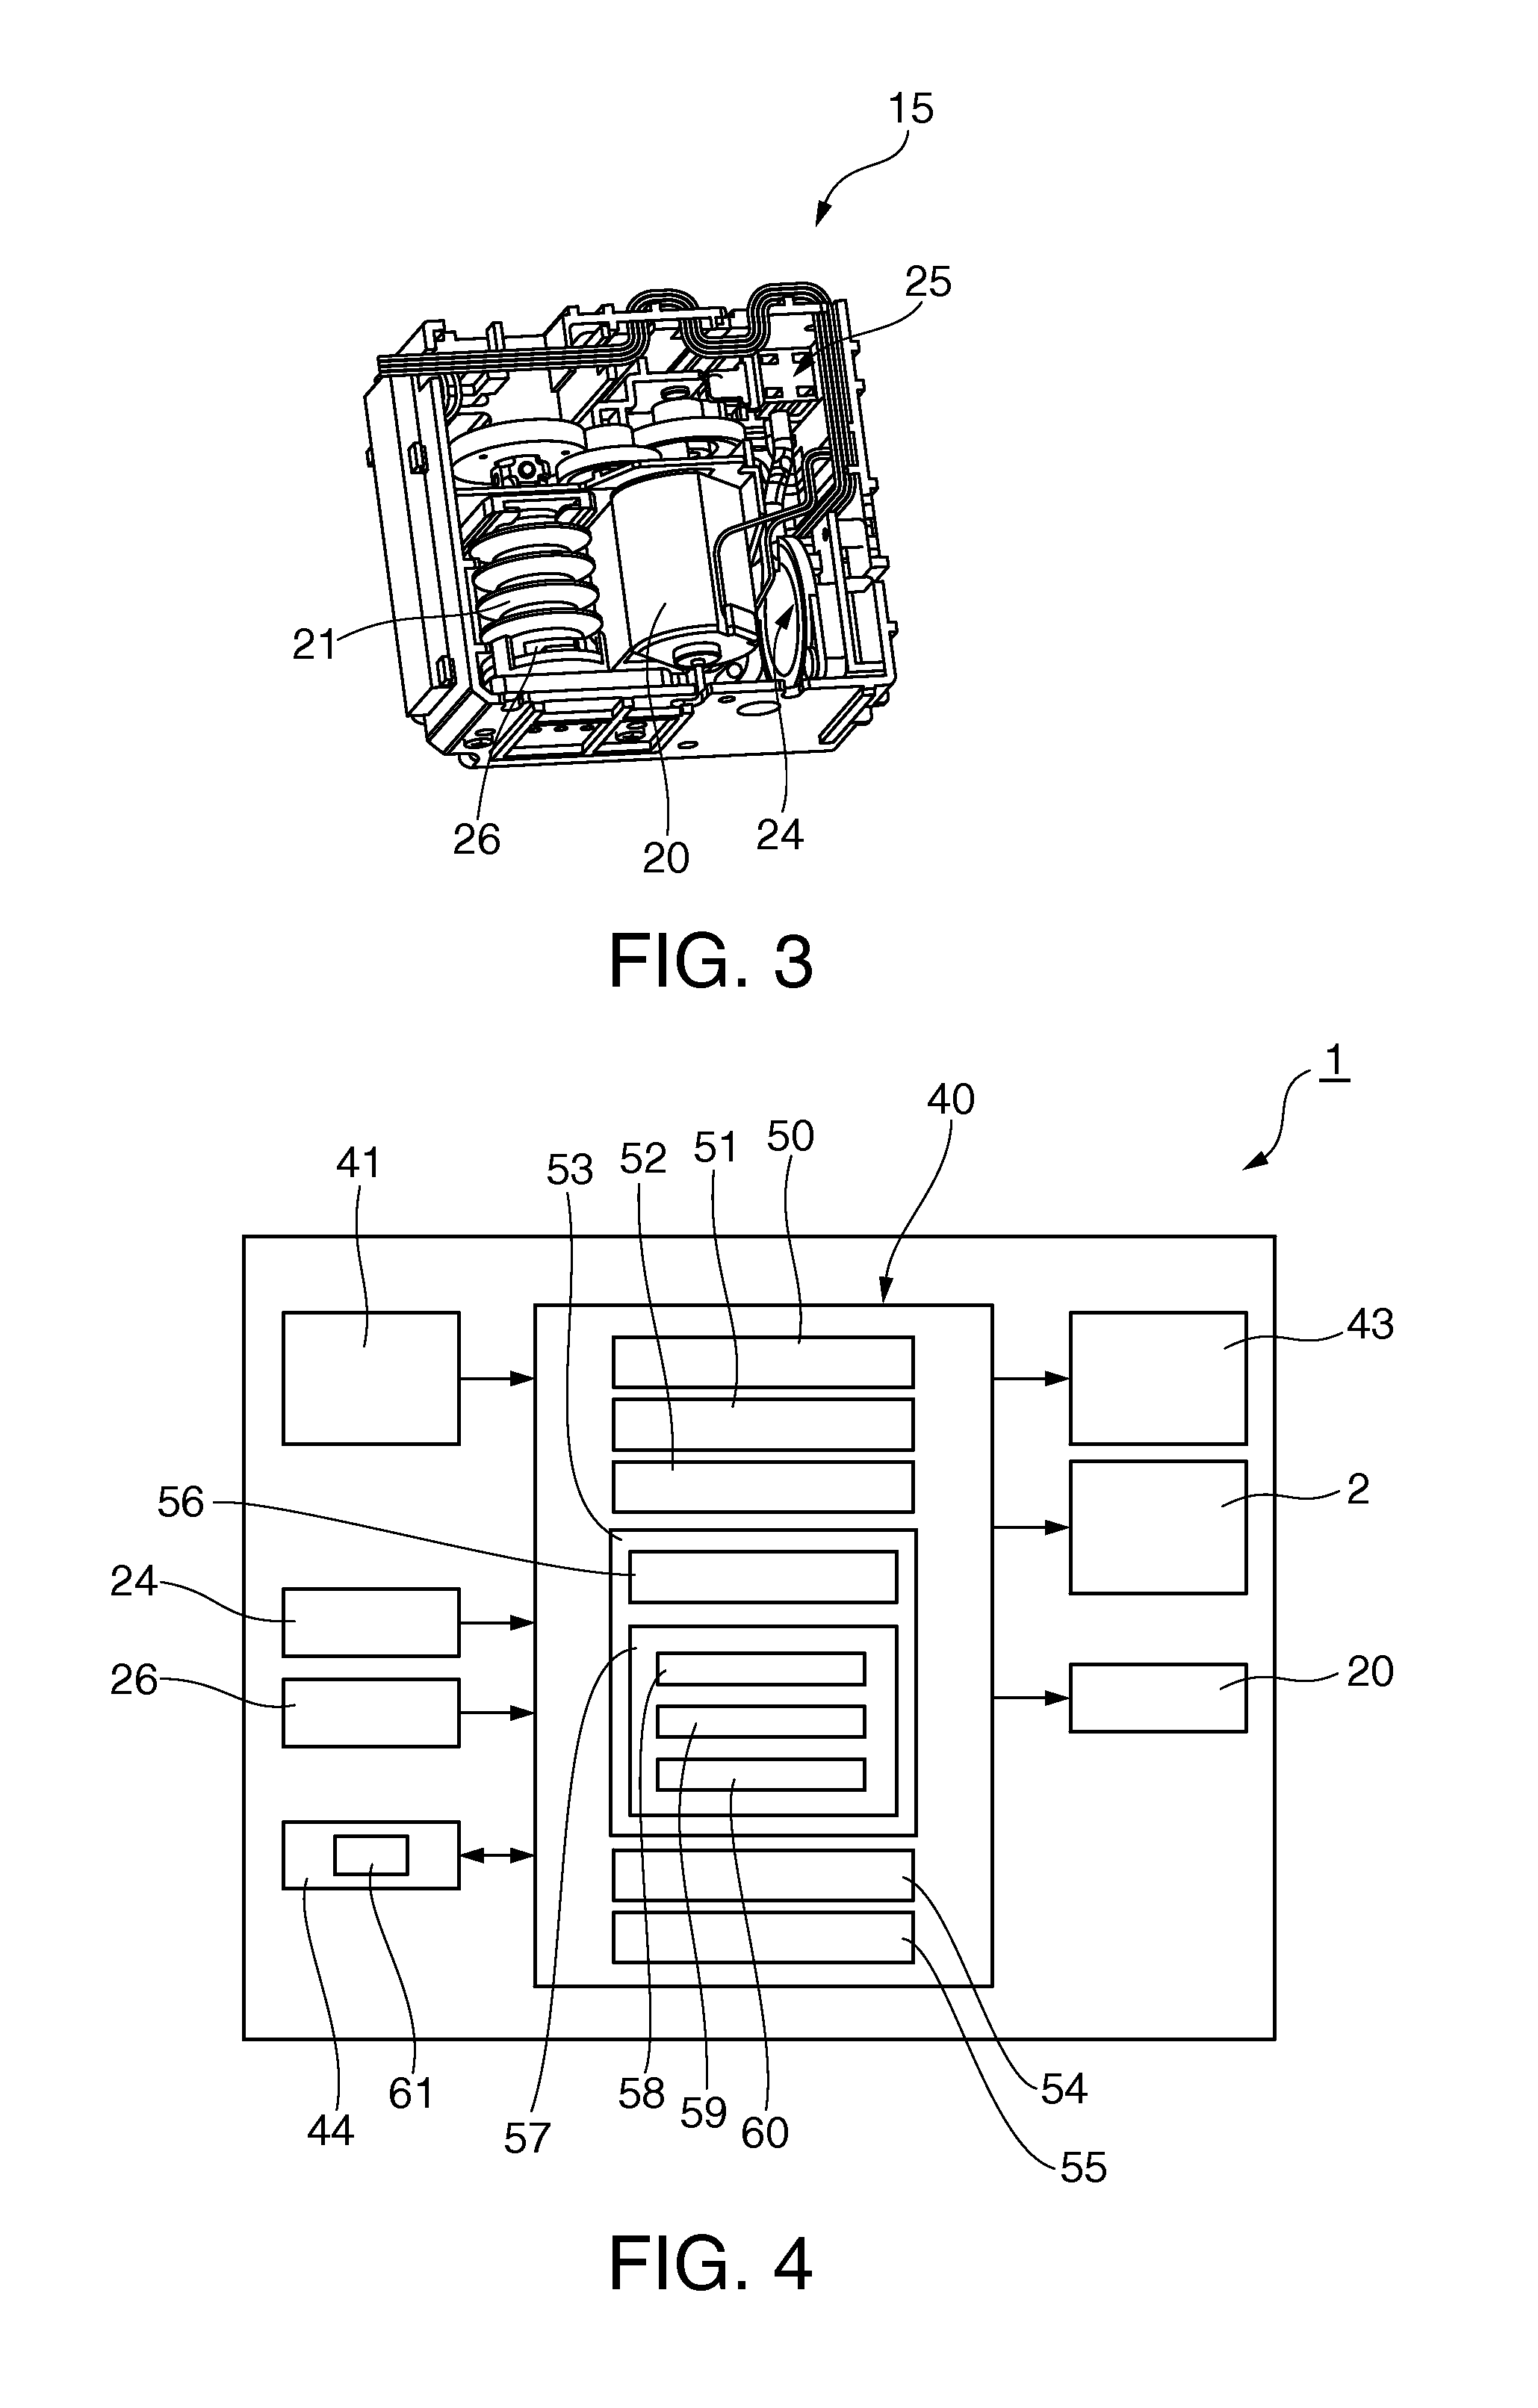 Ink supply control method for an inkjet printer, and an inkjet printer